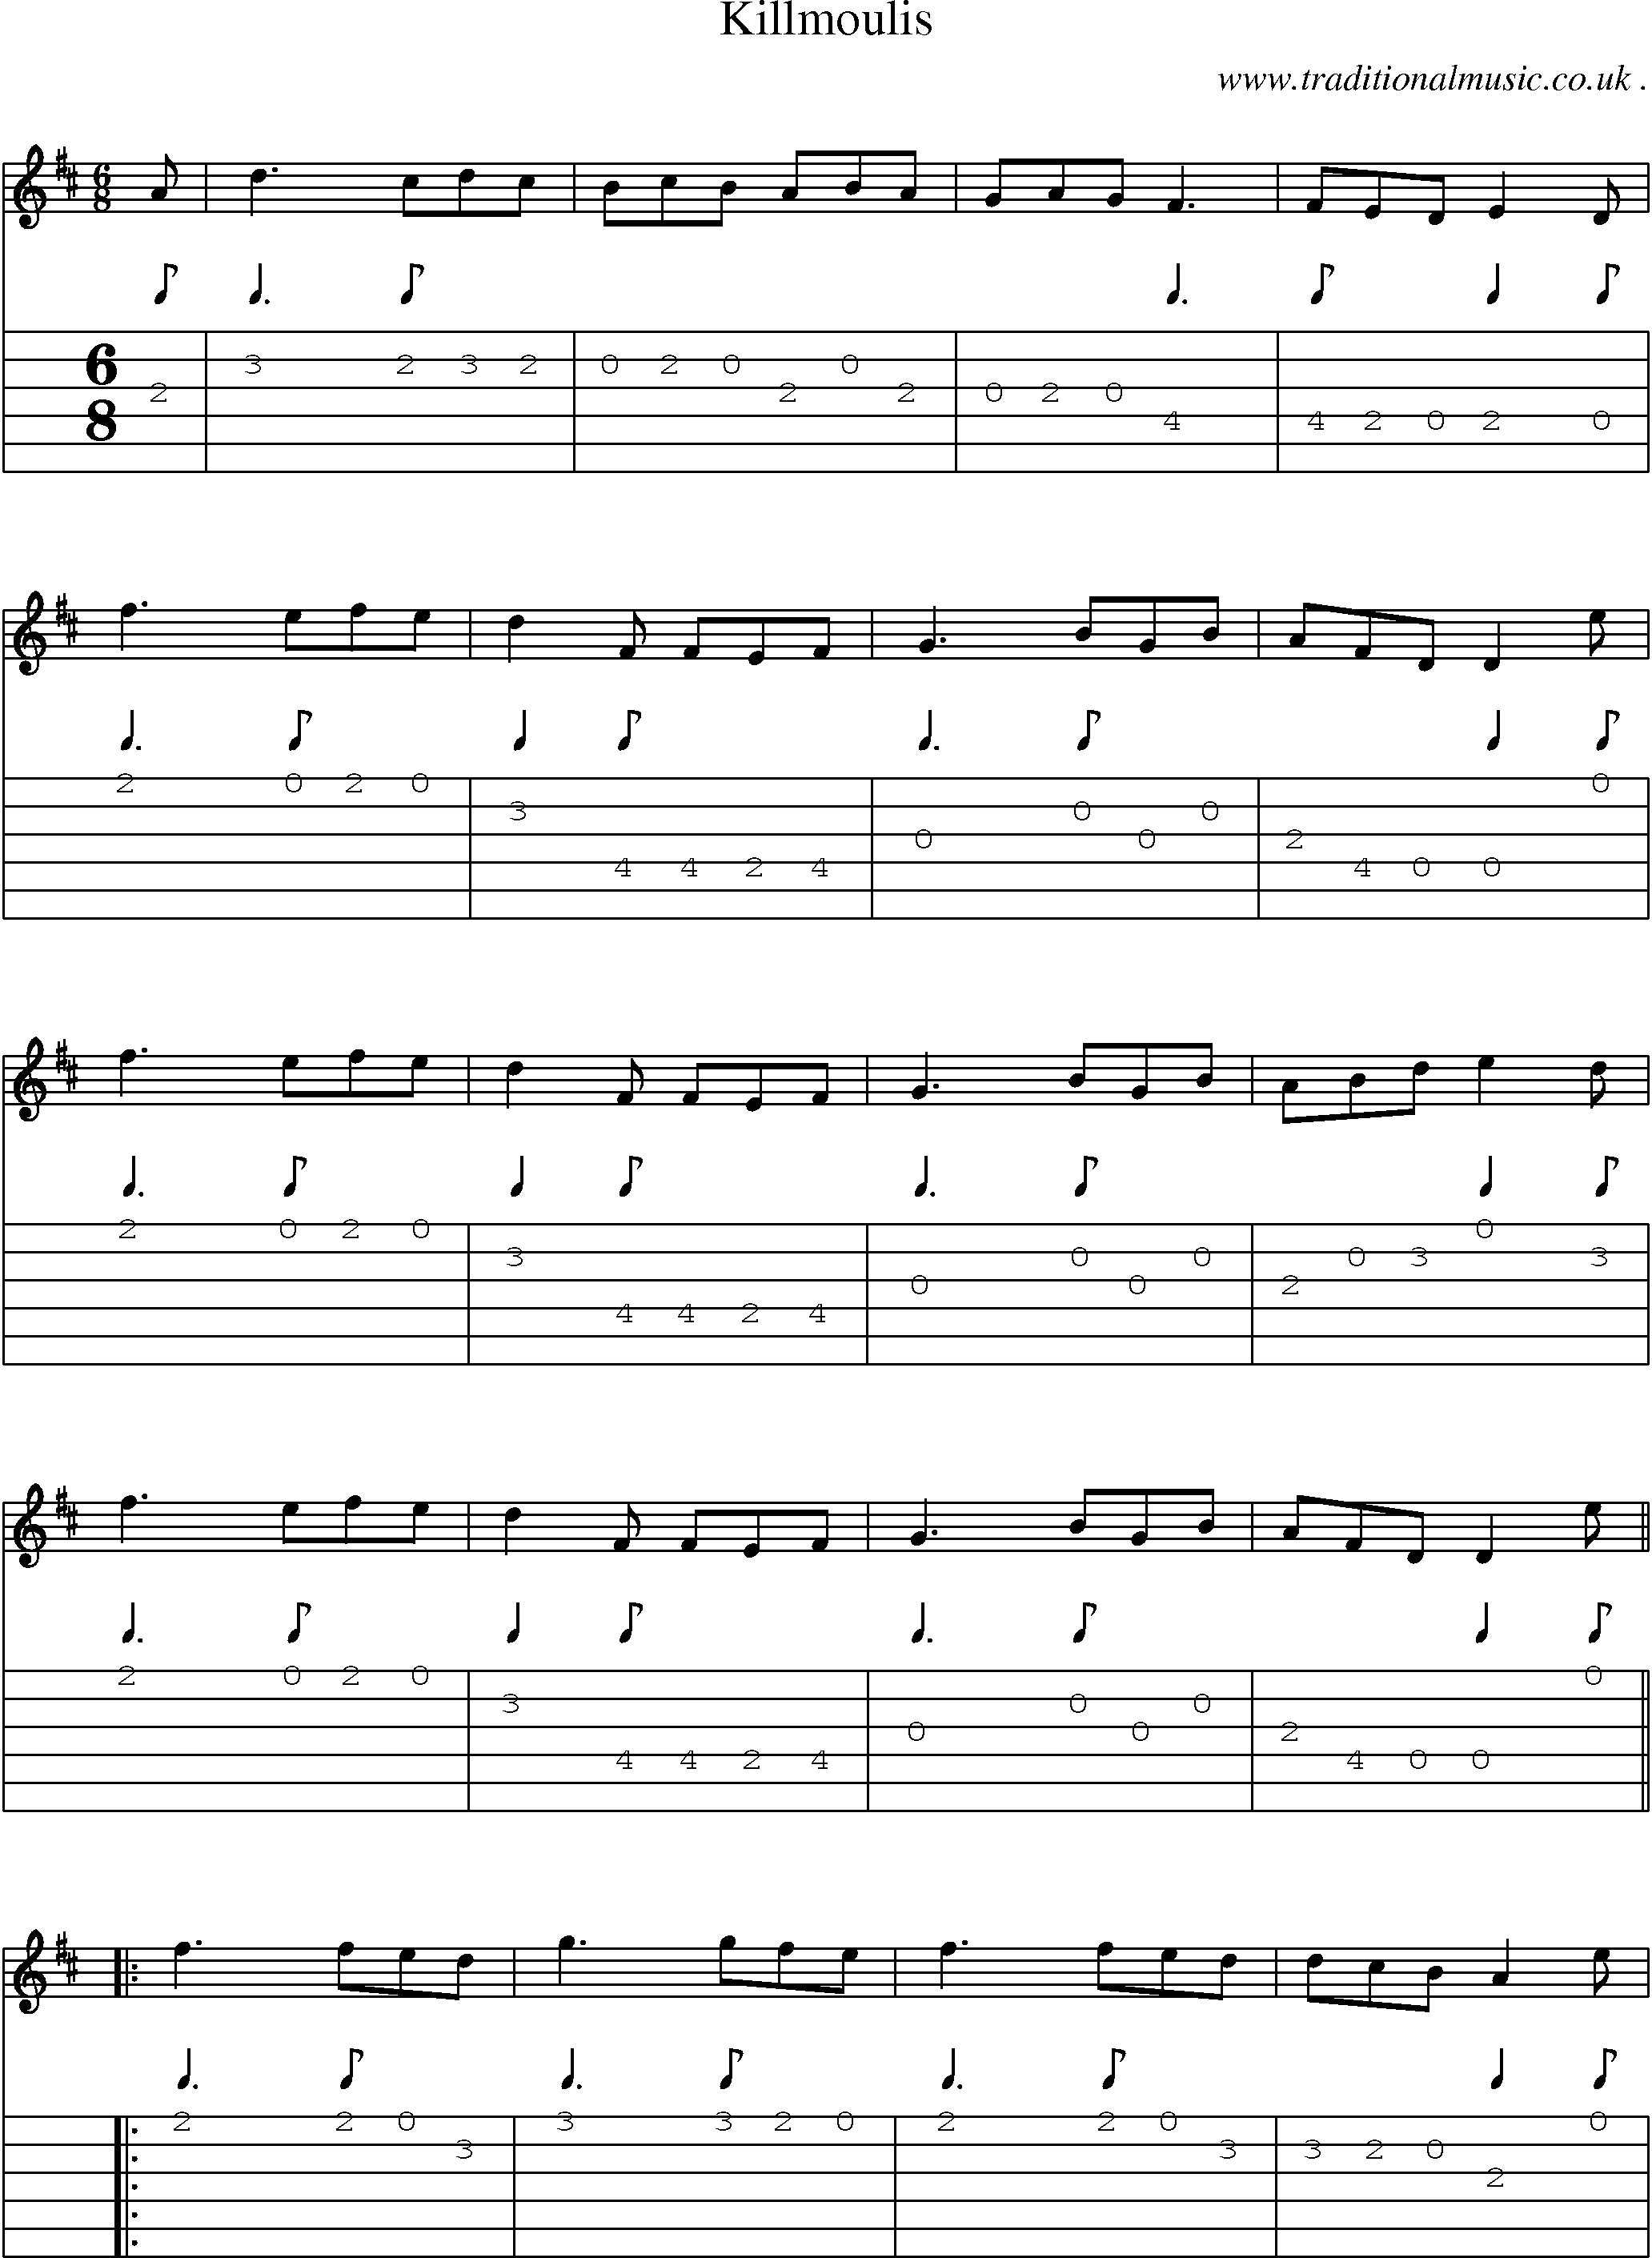 Sheet-Music and Guitar Tabs for Killmoulis